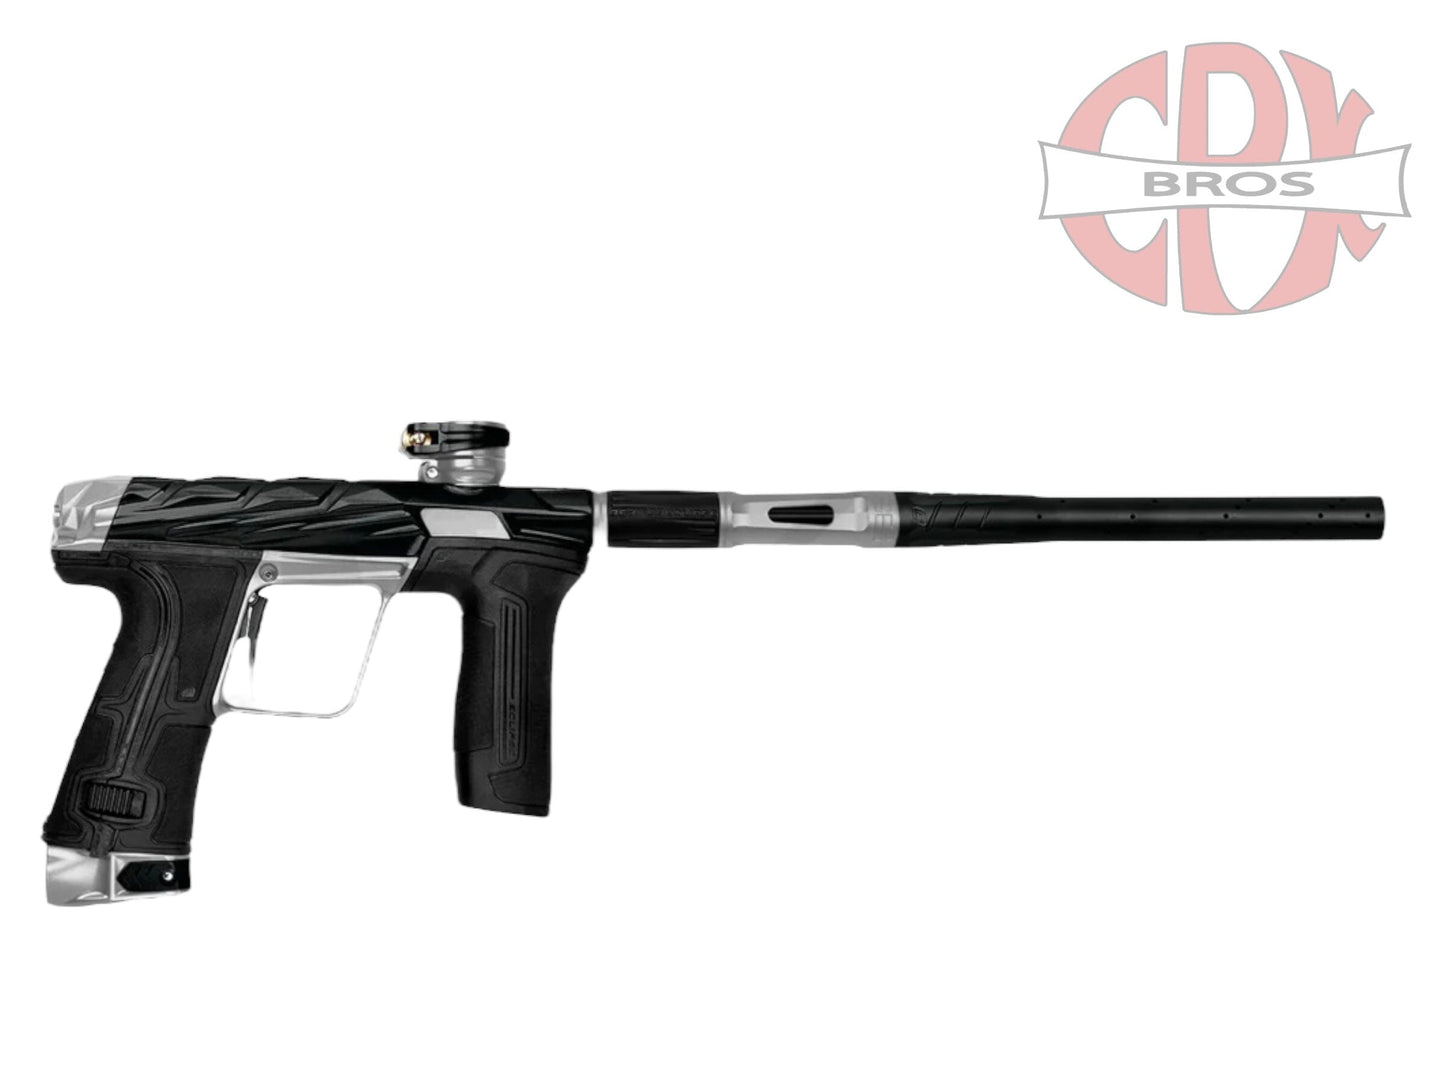 Used NEW PLANET ECLIPSE CS3 - INFAMOUS EDITION BLACK/SILVER Paintball Gun from CPXBrosPaintball Buy/Sell/Trade Paintball Markers, New Paintball Guns, Paintball Hoppers, Paintball Masks, and Hormesis Headbands